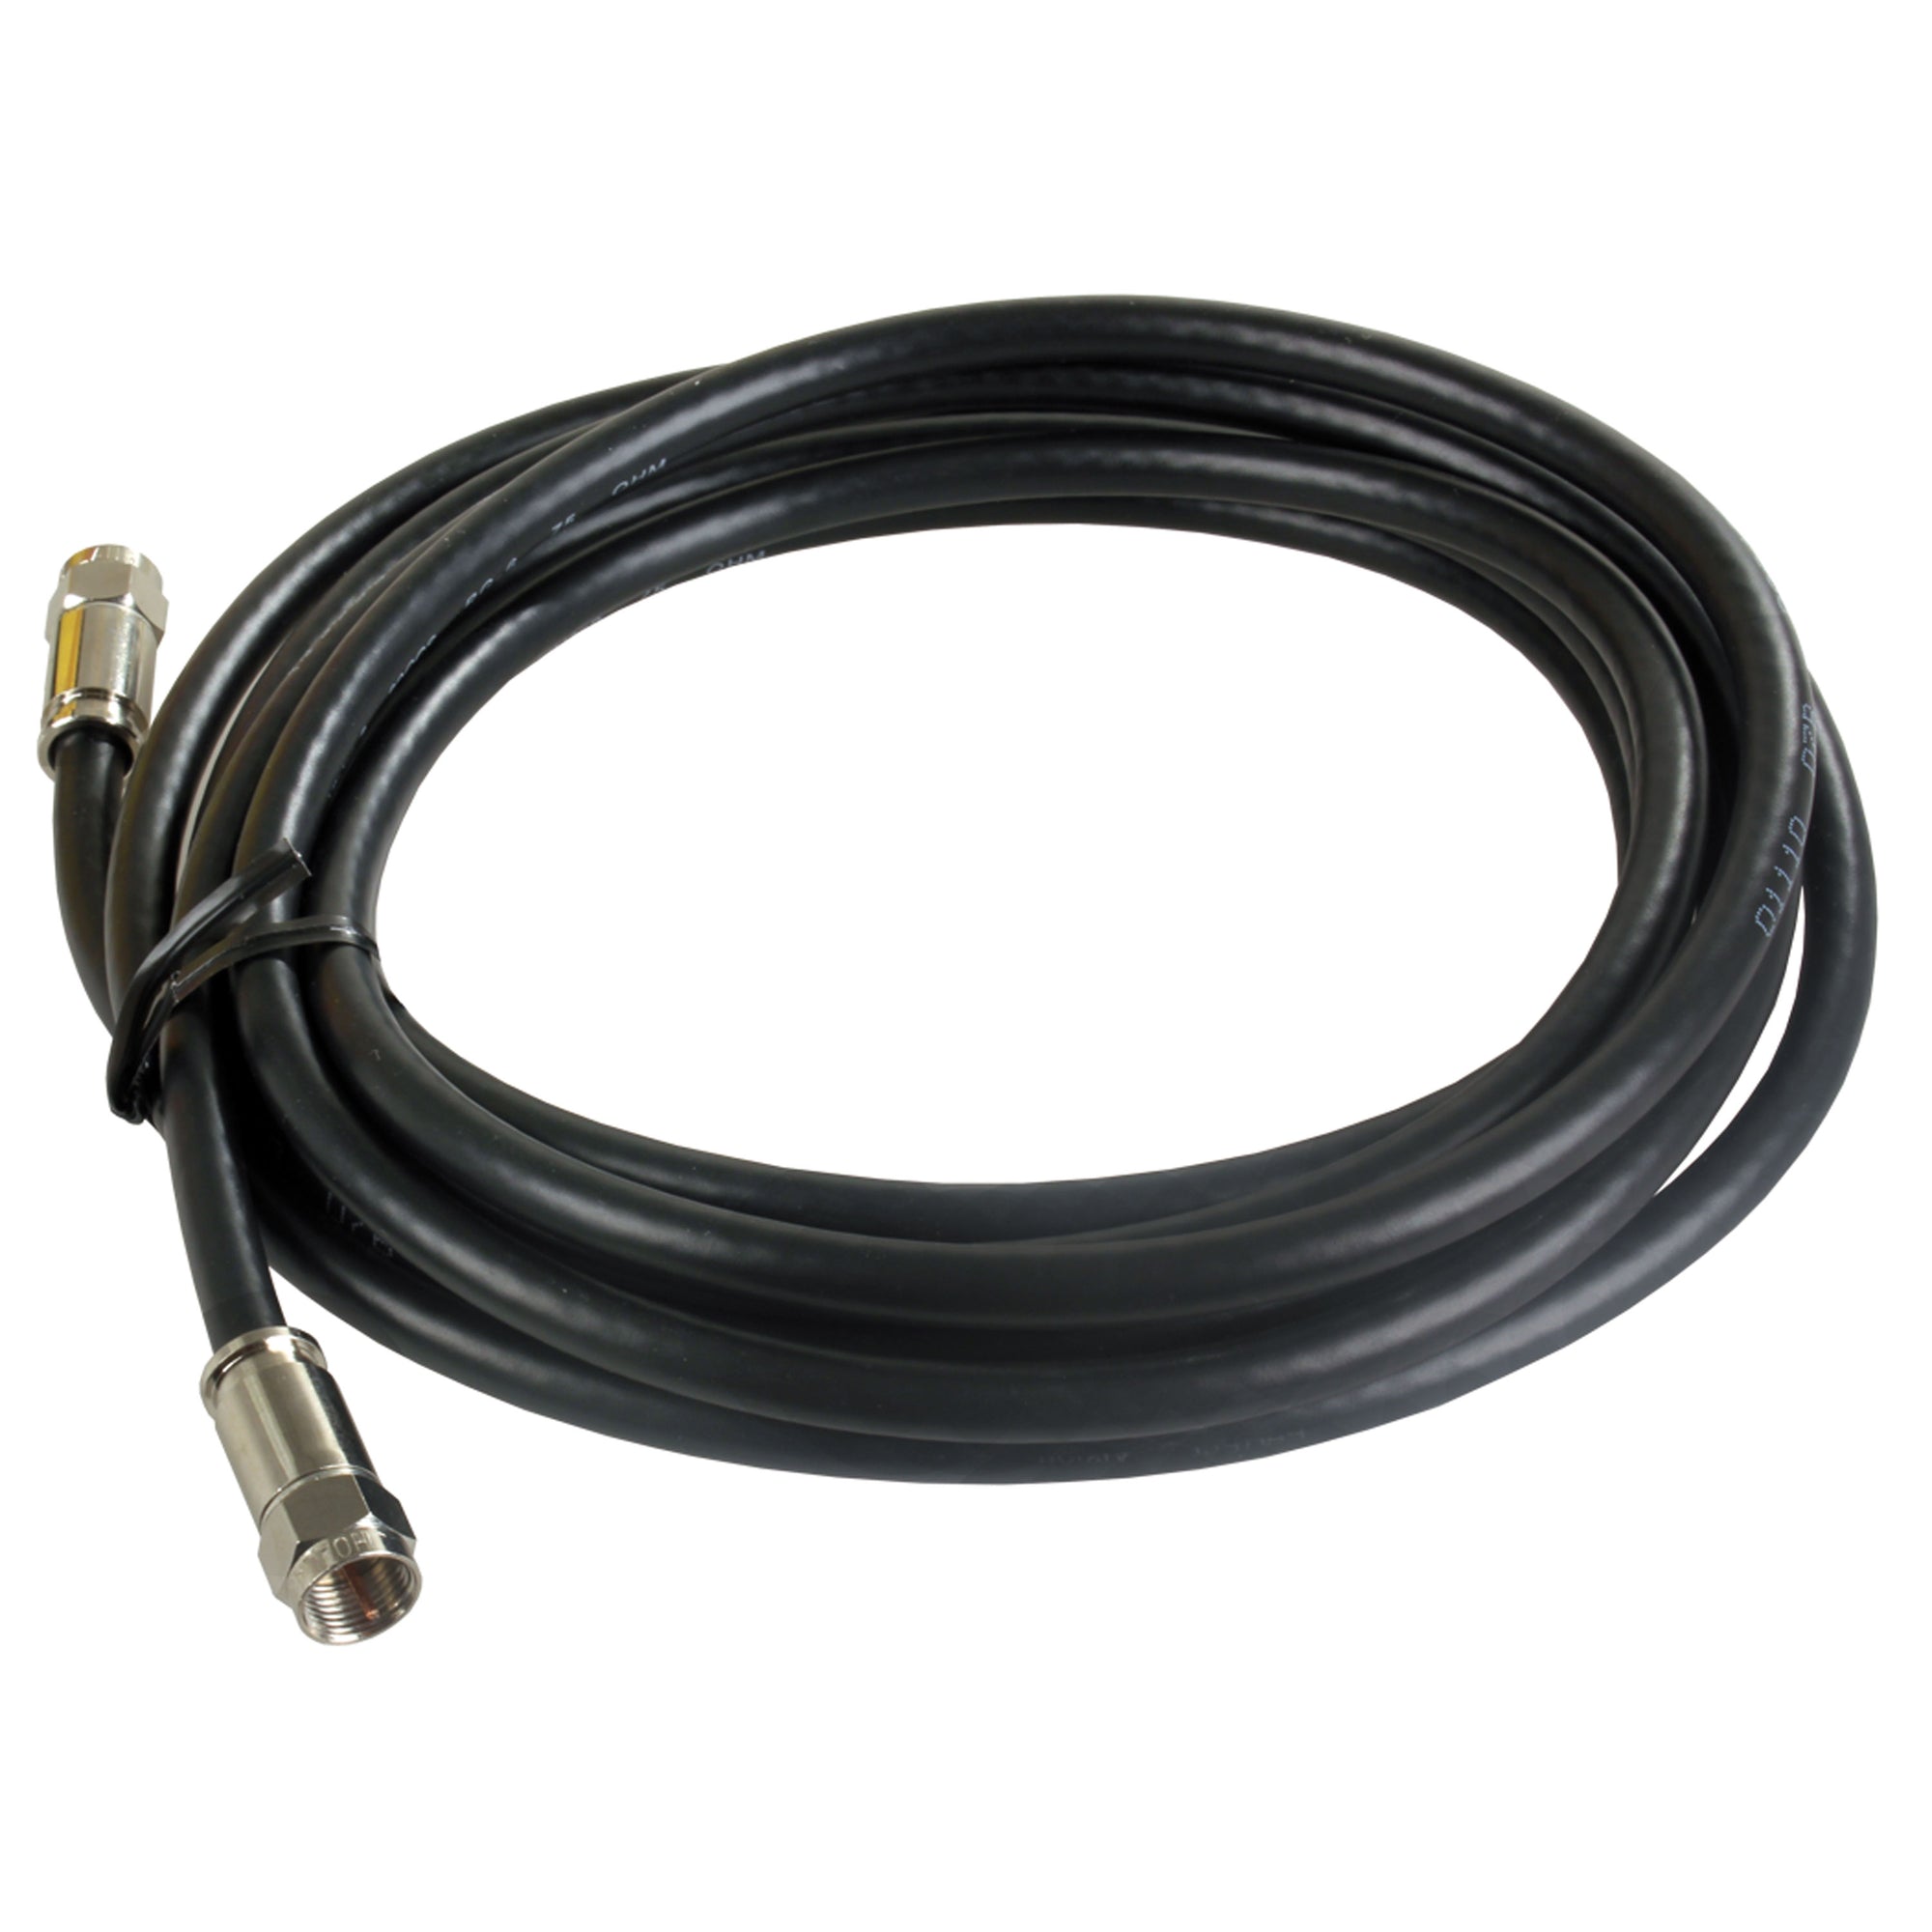 JR Products 47965 12' Rg6 Exterior TV Cable